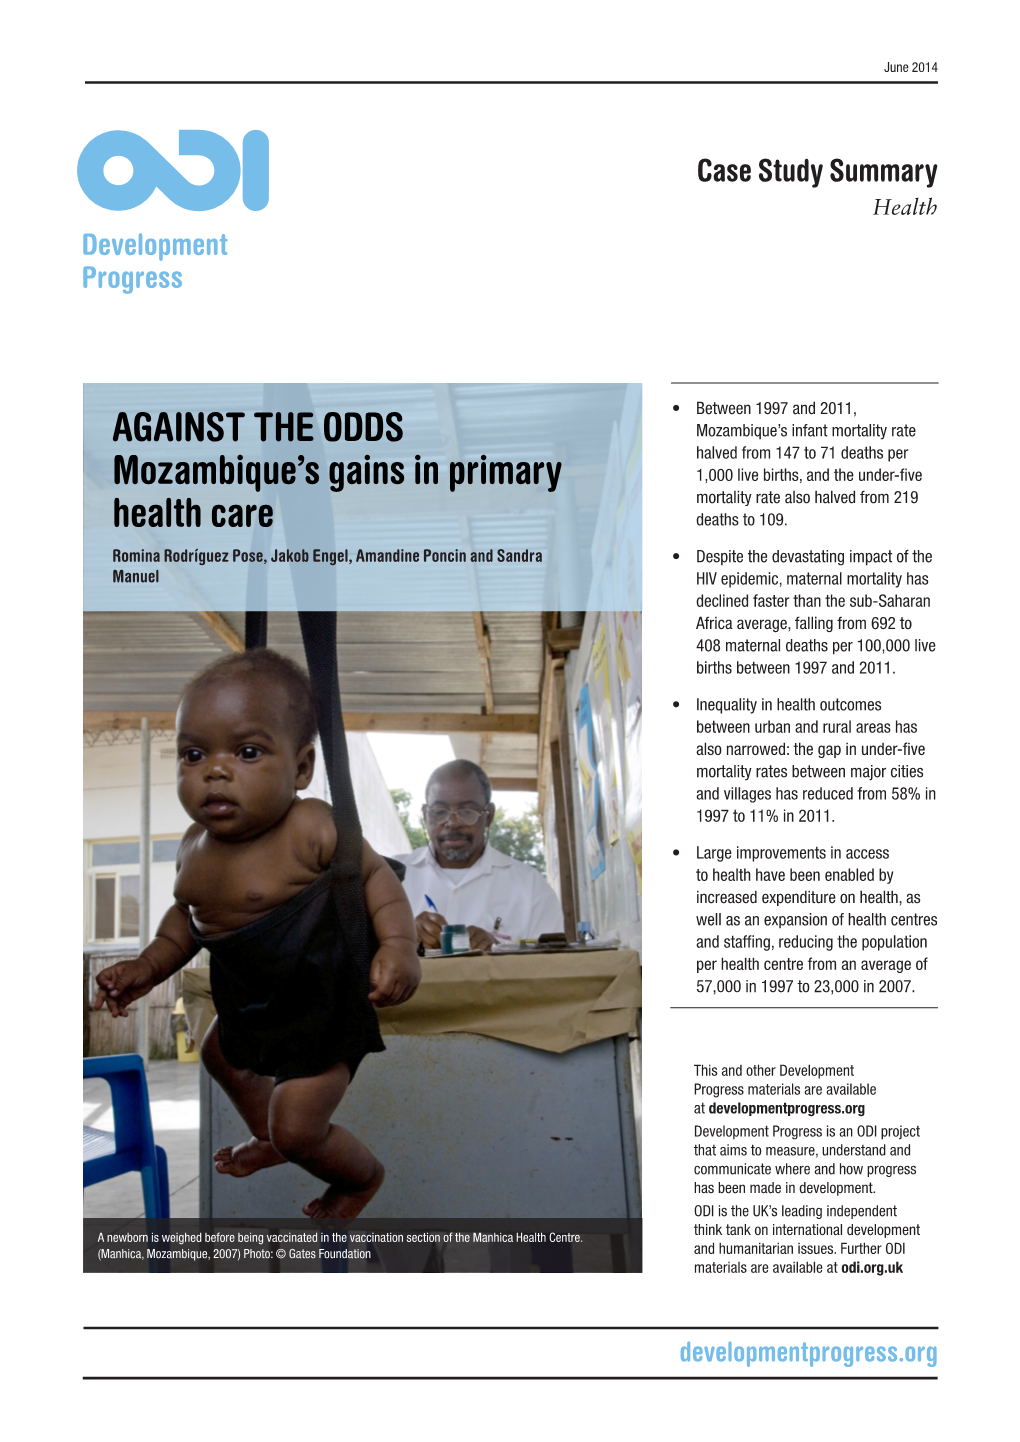 AGAINST the ODDS Mozambique's Gains in Primary Health Care